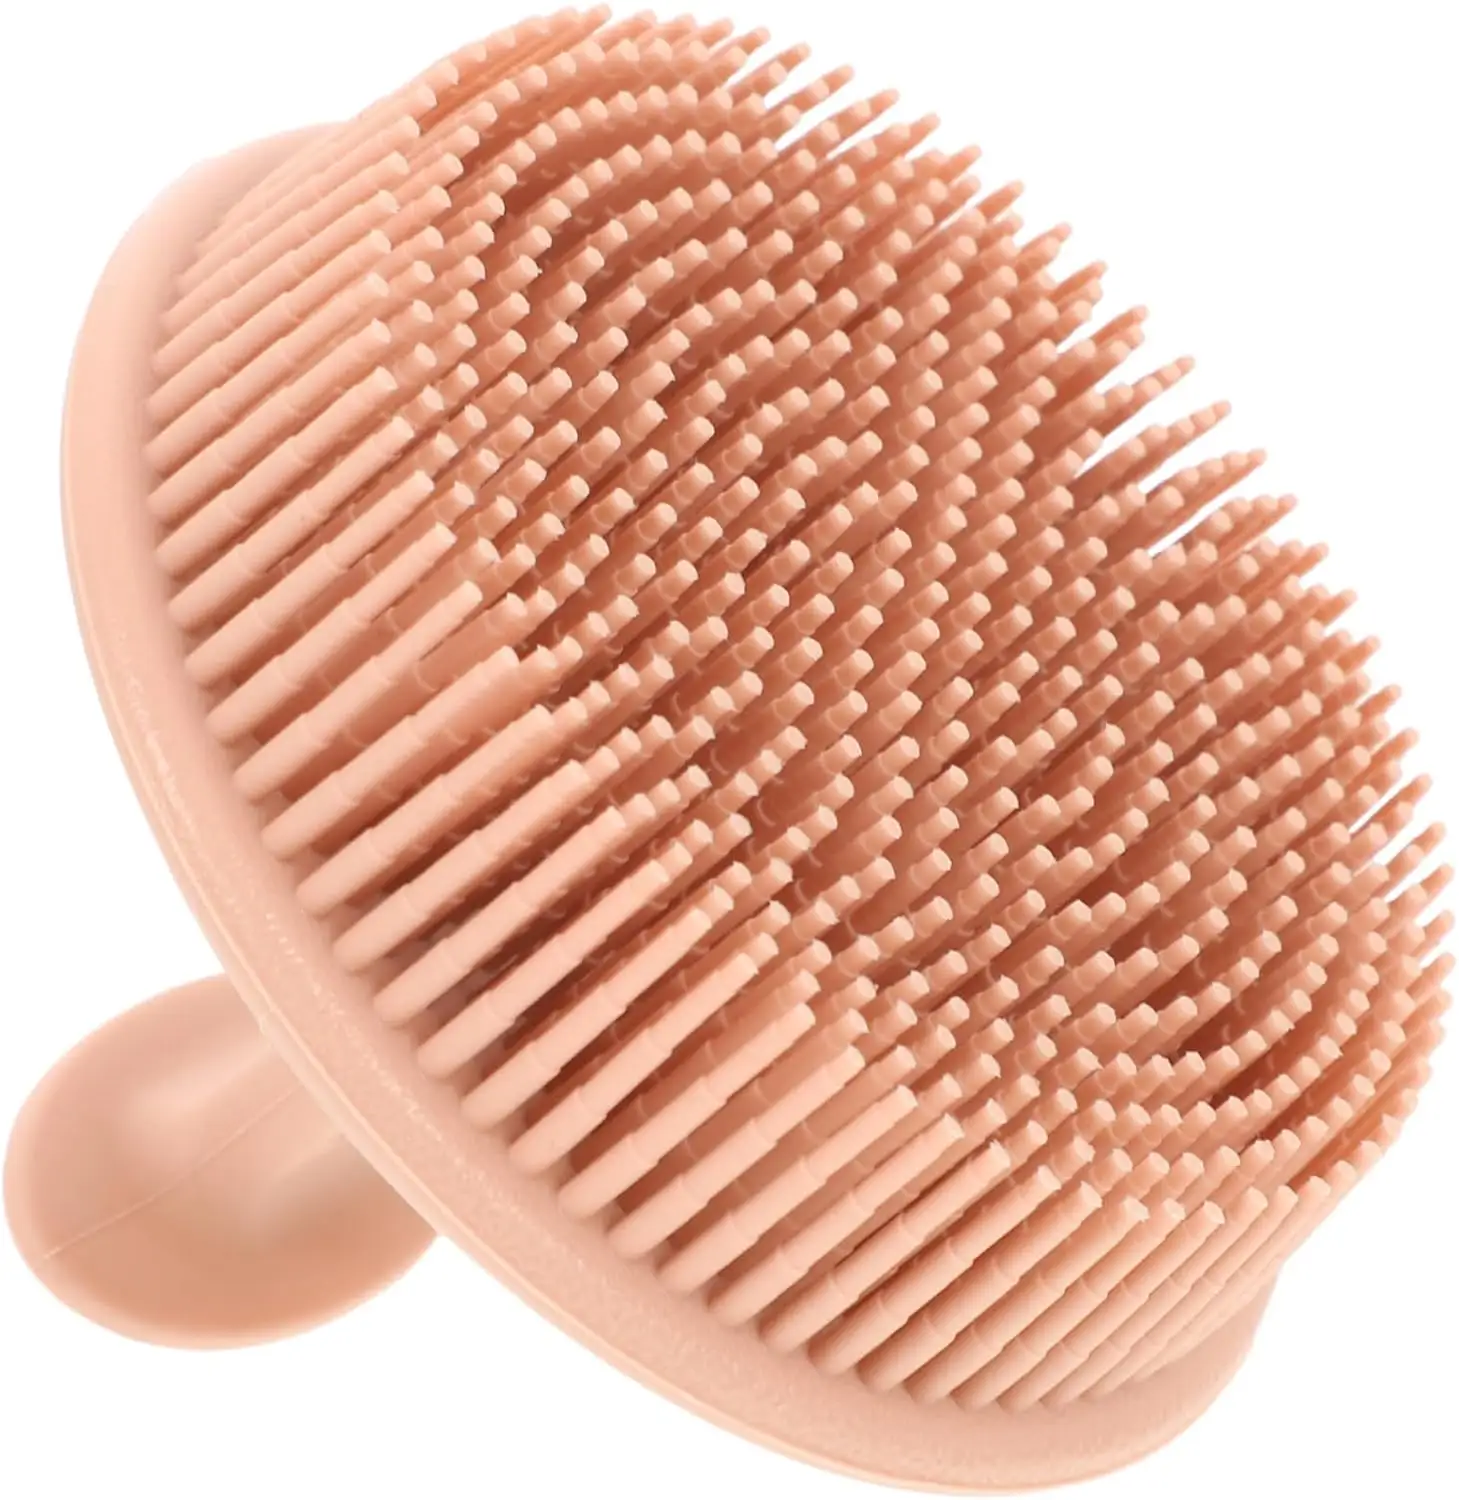 Silicone back cleaning brush Body Scrubber OEM/ODM cepillo corporal 12.5x12.5cm Octagon Shape Wholesale Bath Dry